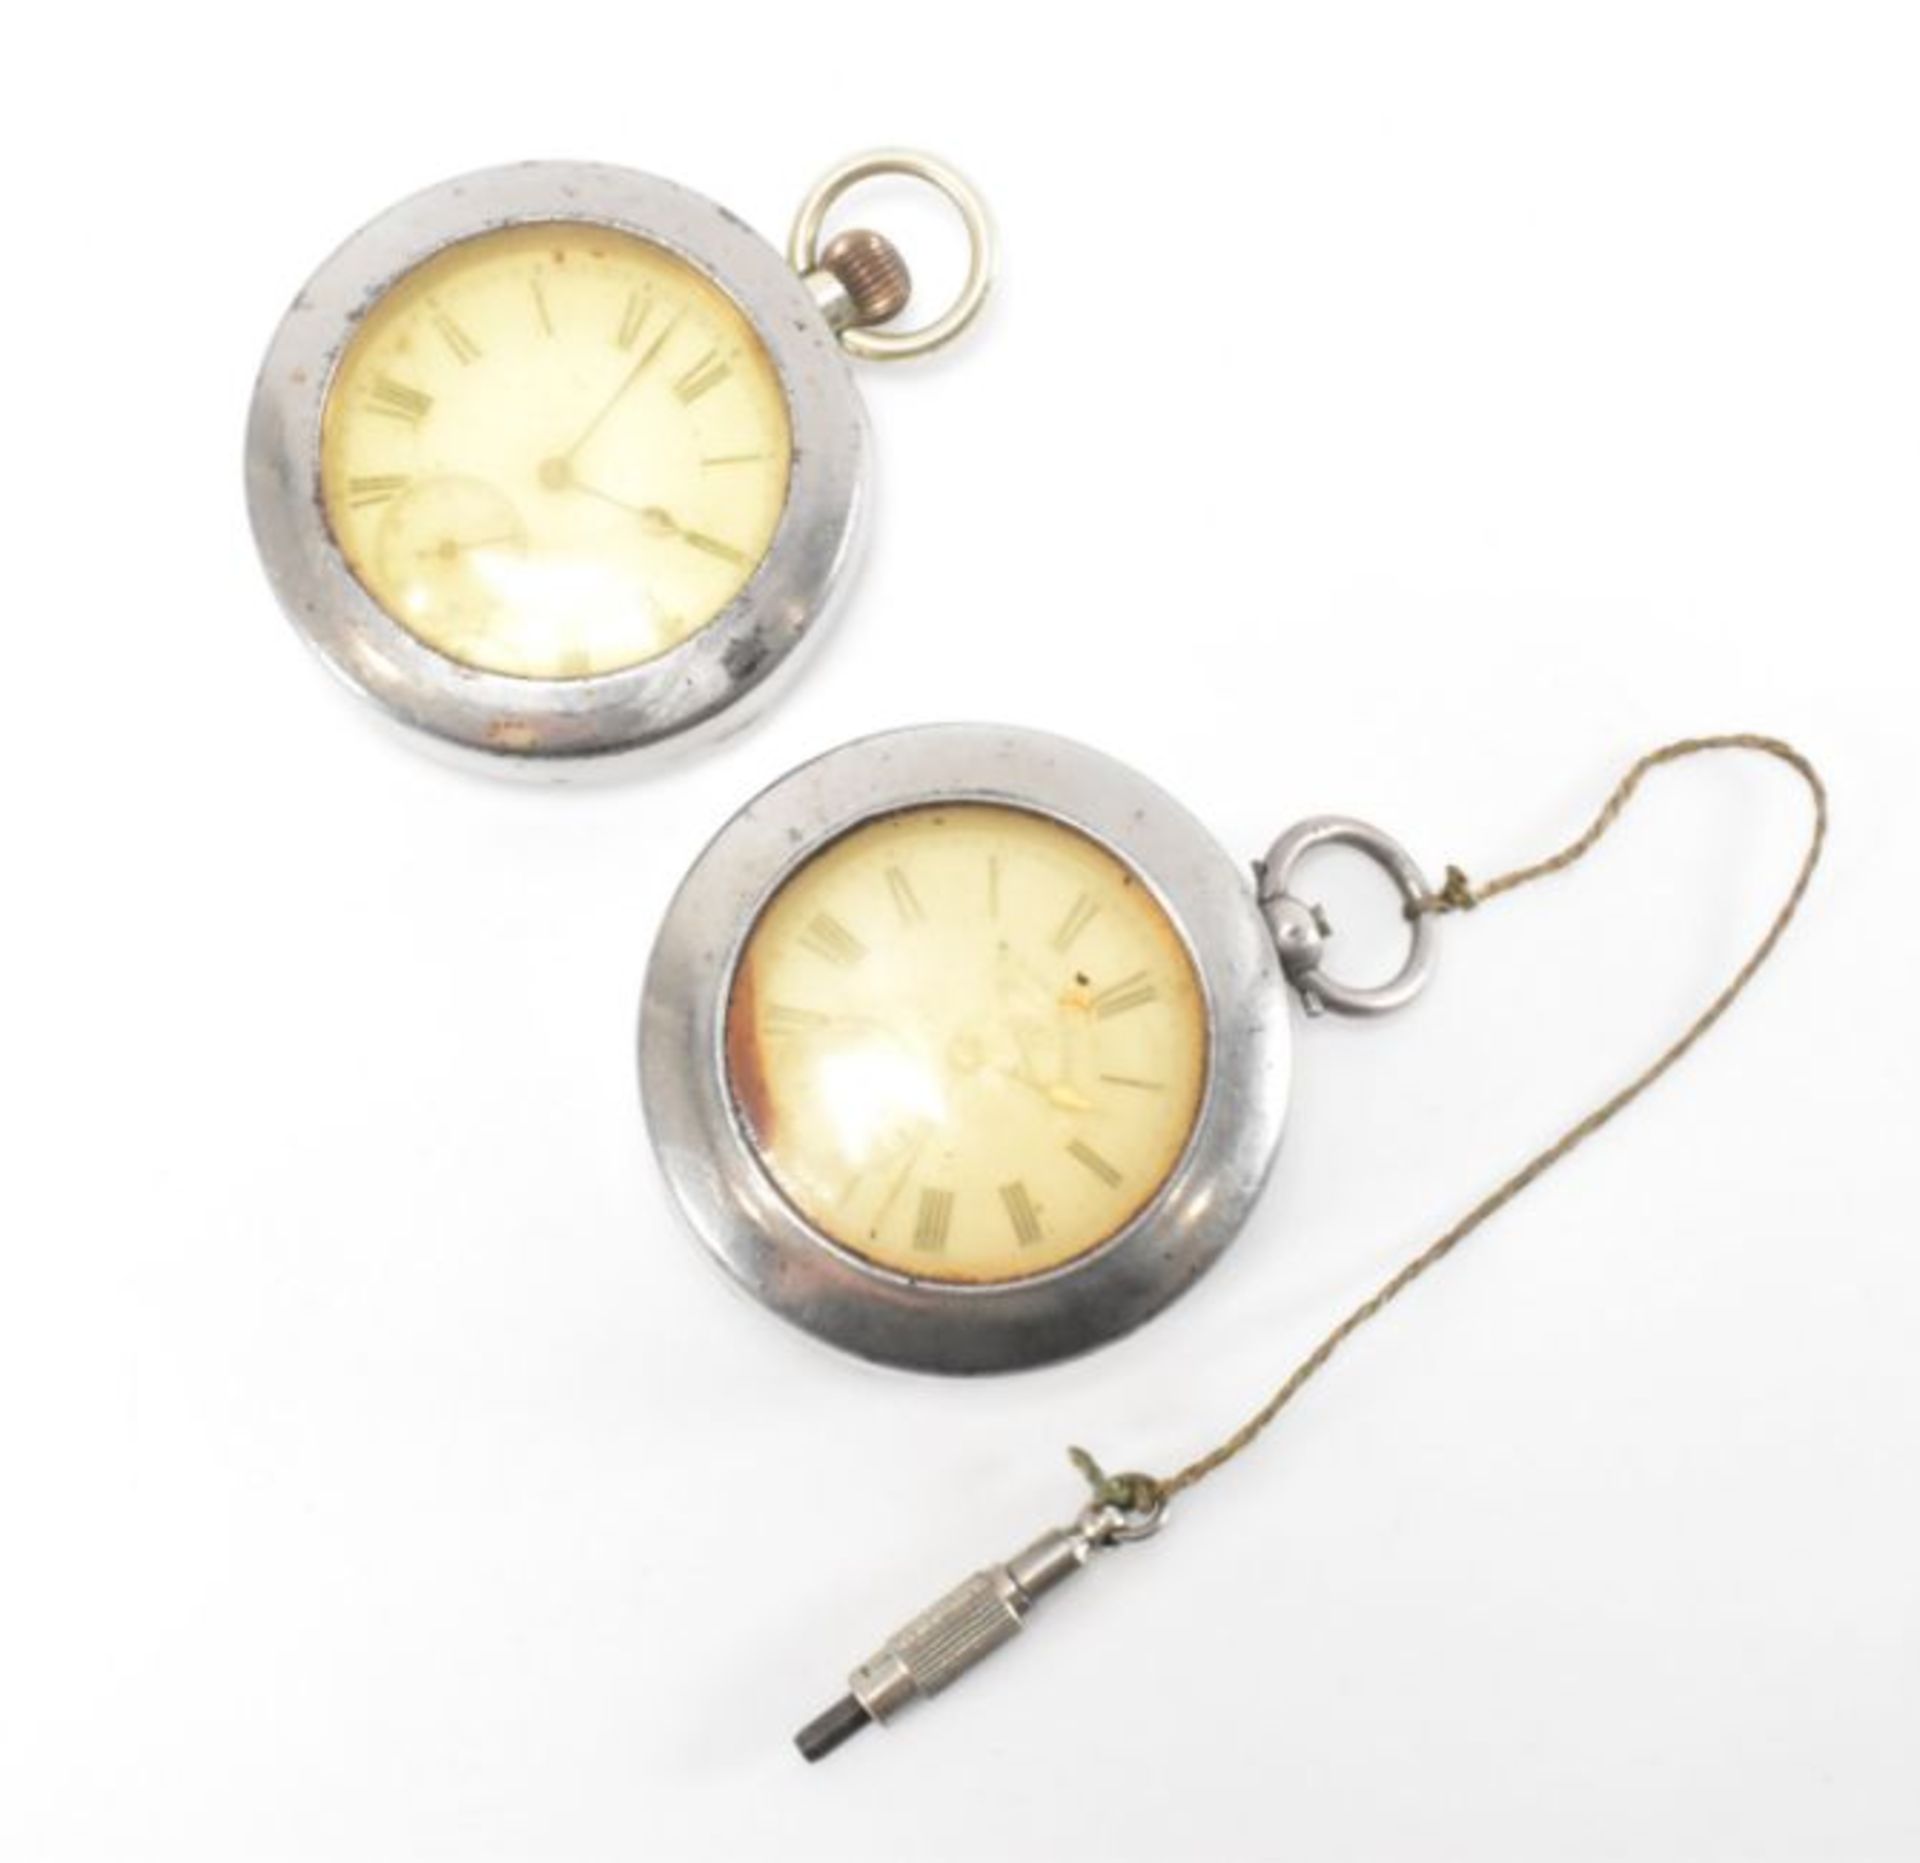 TWO POCKET WATCHES - HE PECK & LABRADOR